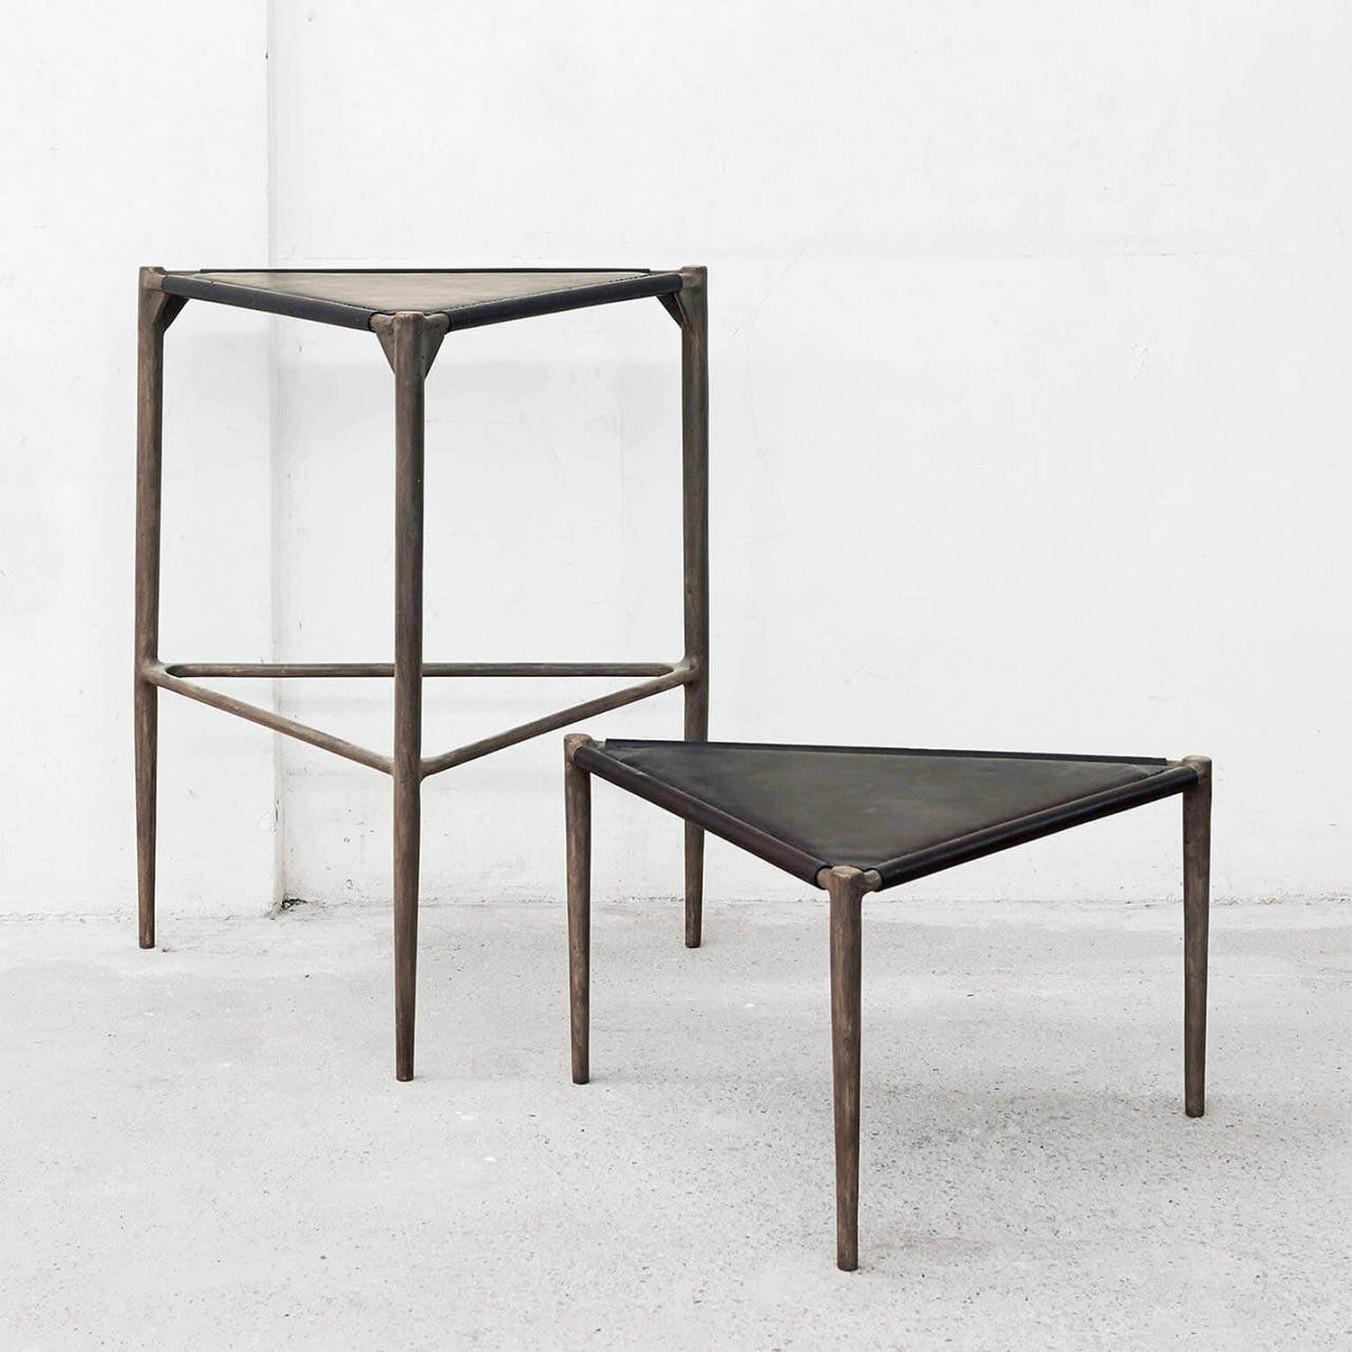 Contemporary bronze stool - Alchemy Stool by Rick Owens
2013
Dimensions: L 62 x W 50 x H 34 cm
Materials: Bronze
Weight: 10.5 kg

Available in black finish or Nitrate (Dark Brown) finish.

Rick Owens is a California-born fashion and